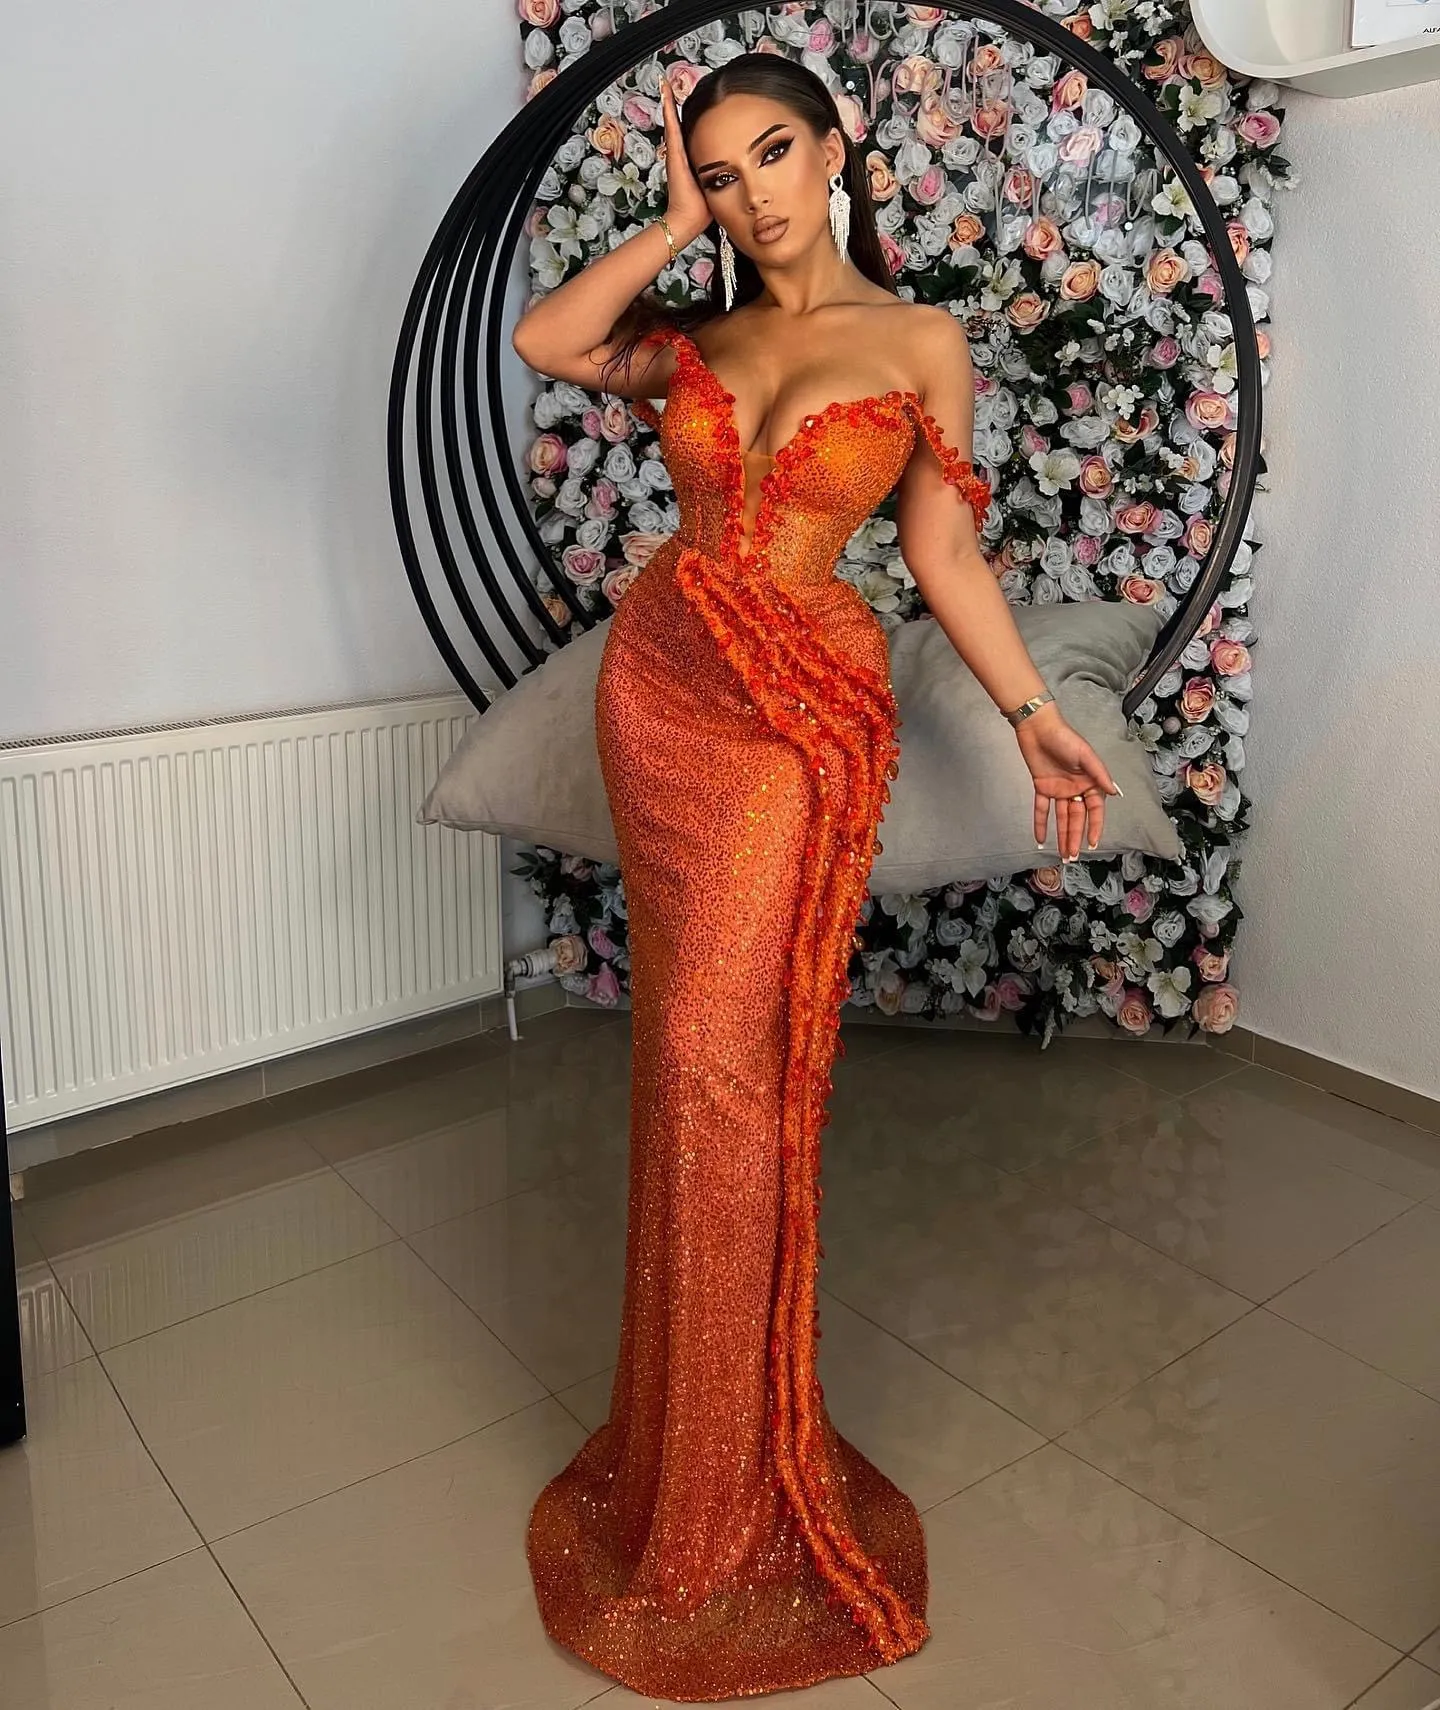 2023 Orange Mermaid Graduation Dress Crystals Sequined Lace Sexy Homecoming Party Formal Cocktail Prom Gowns Dresses ZJ423